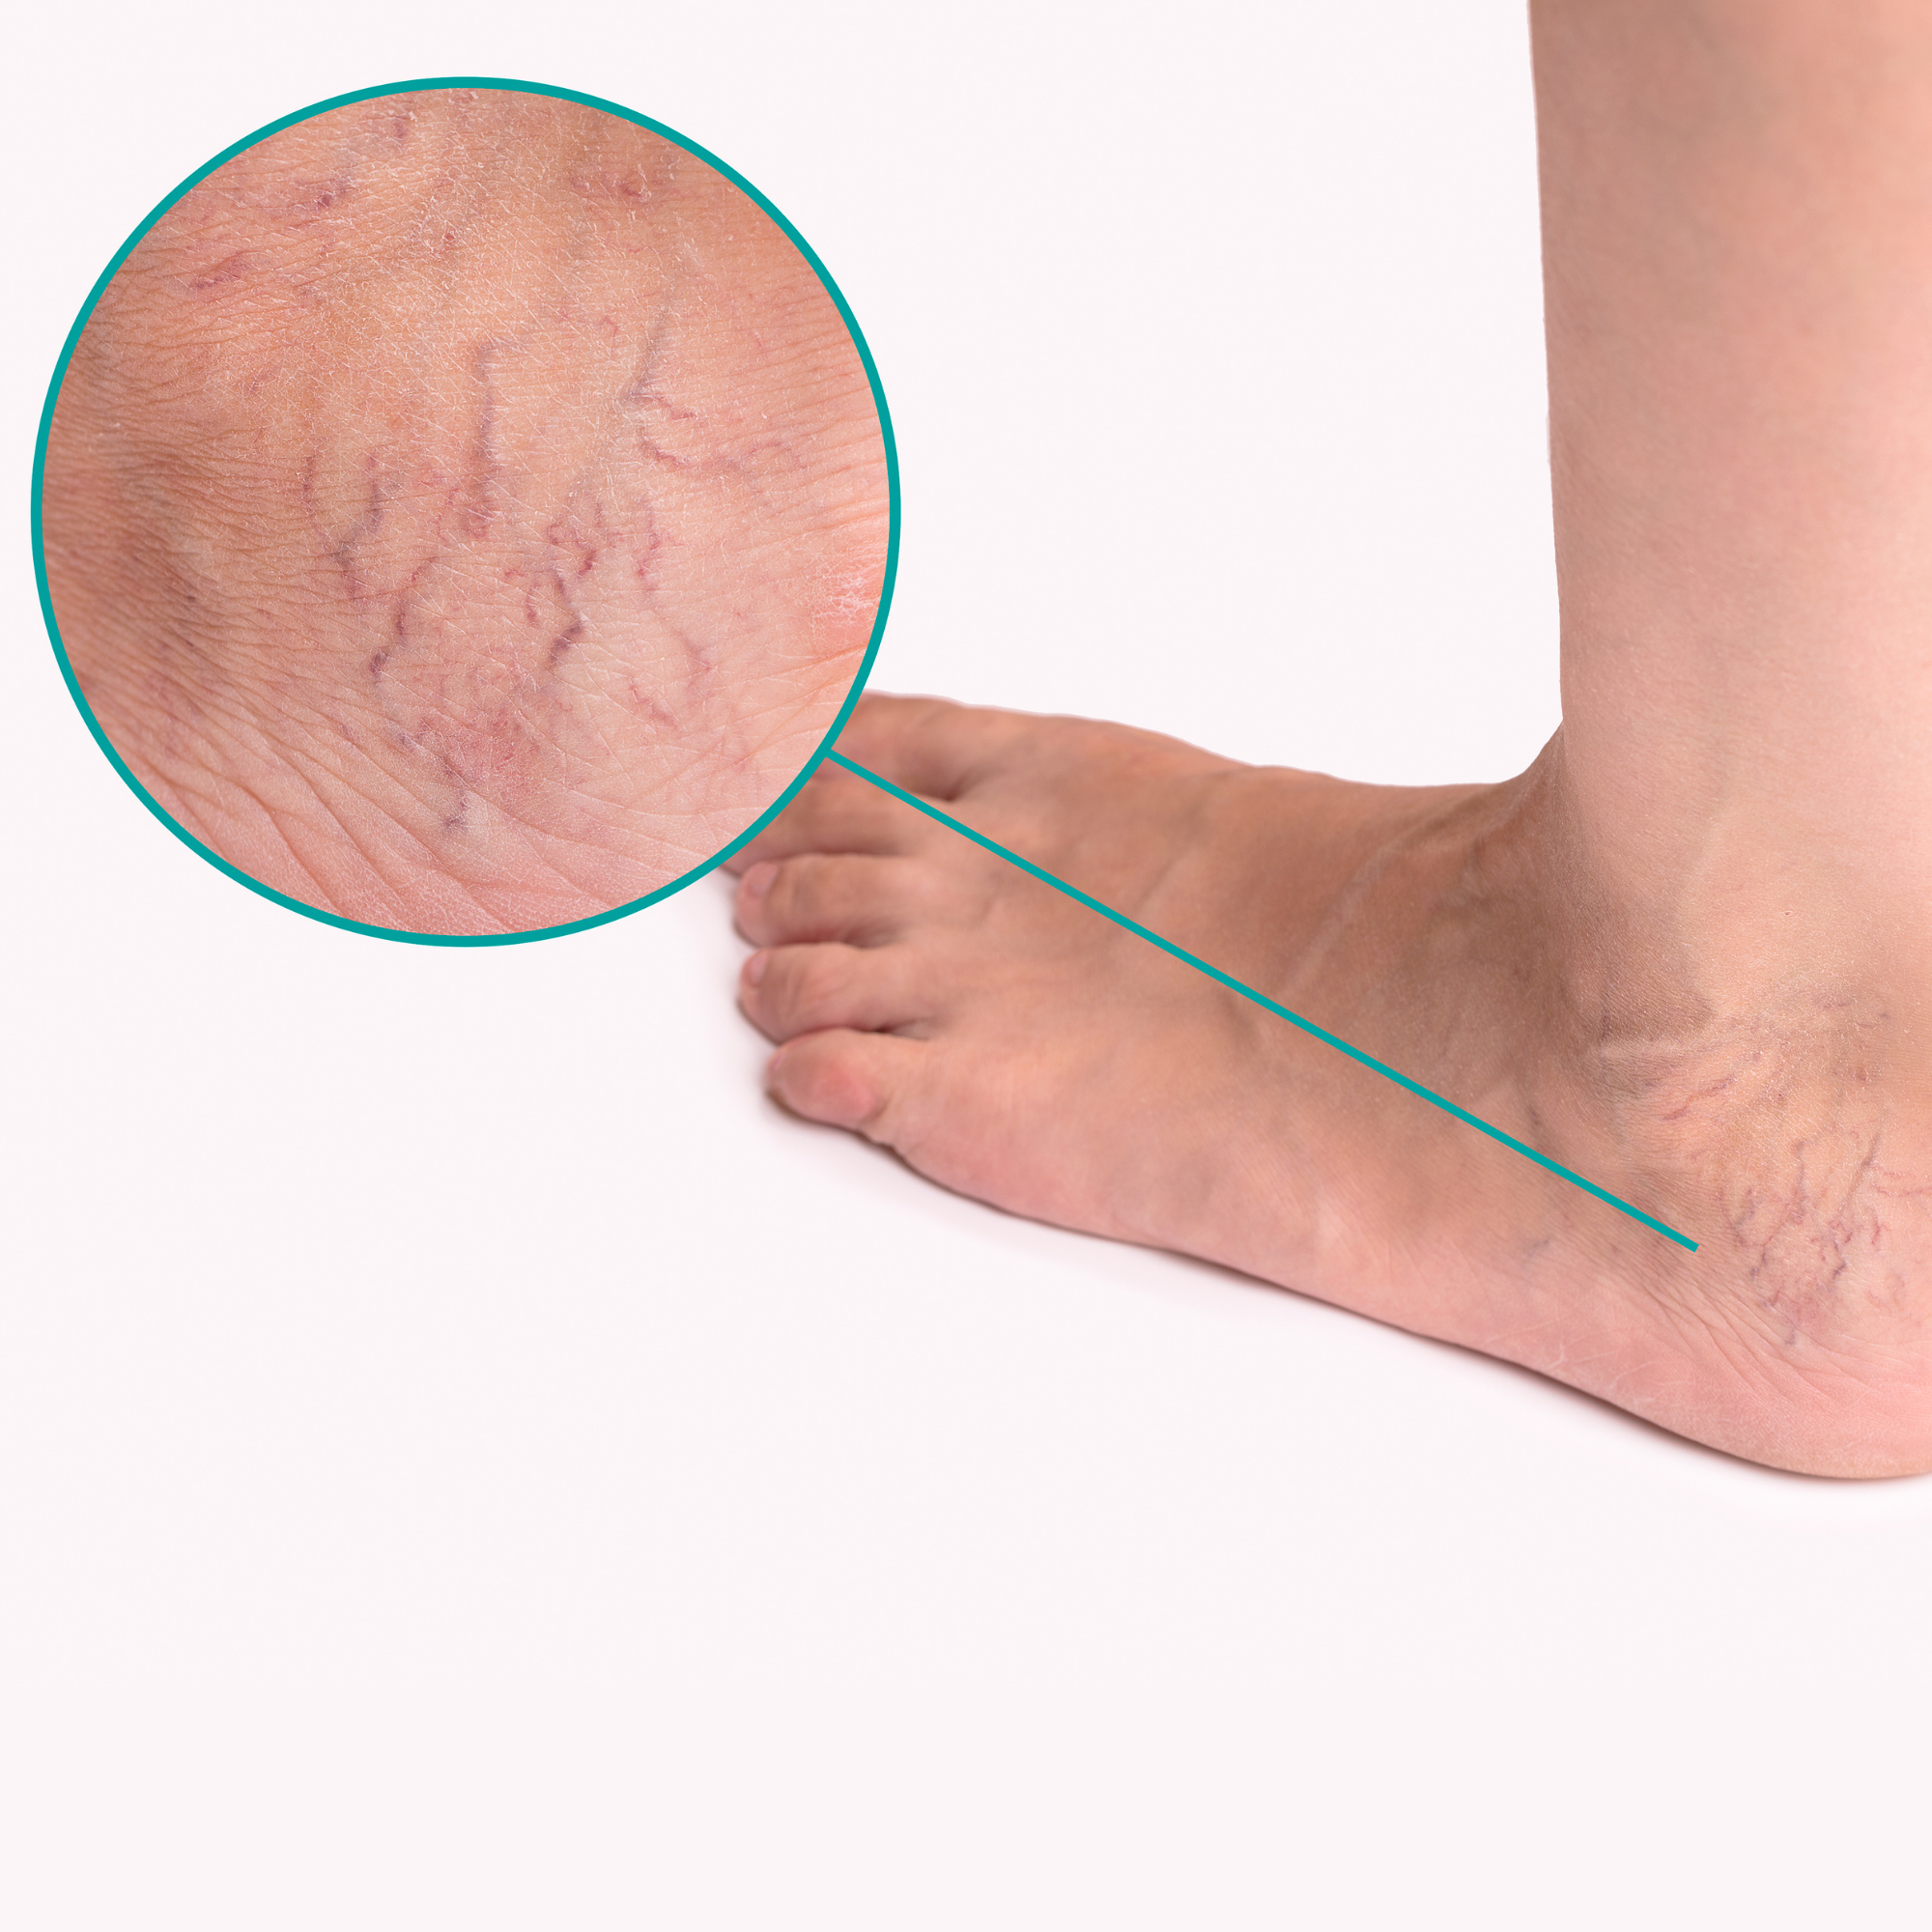 Spider Veins: Causes, Prevention and How to Treat them